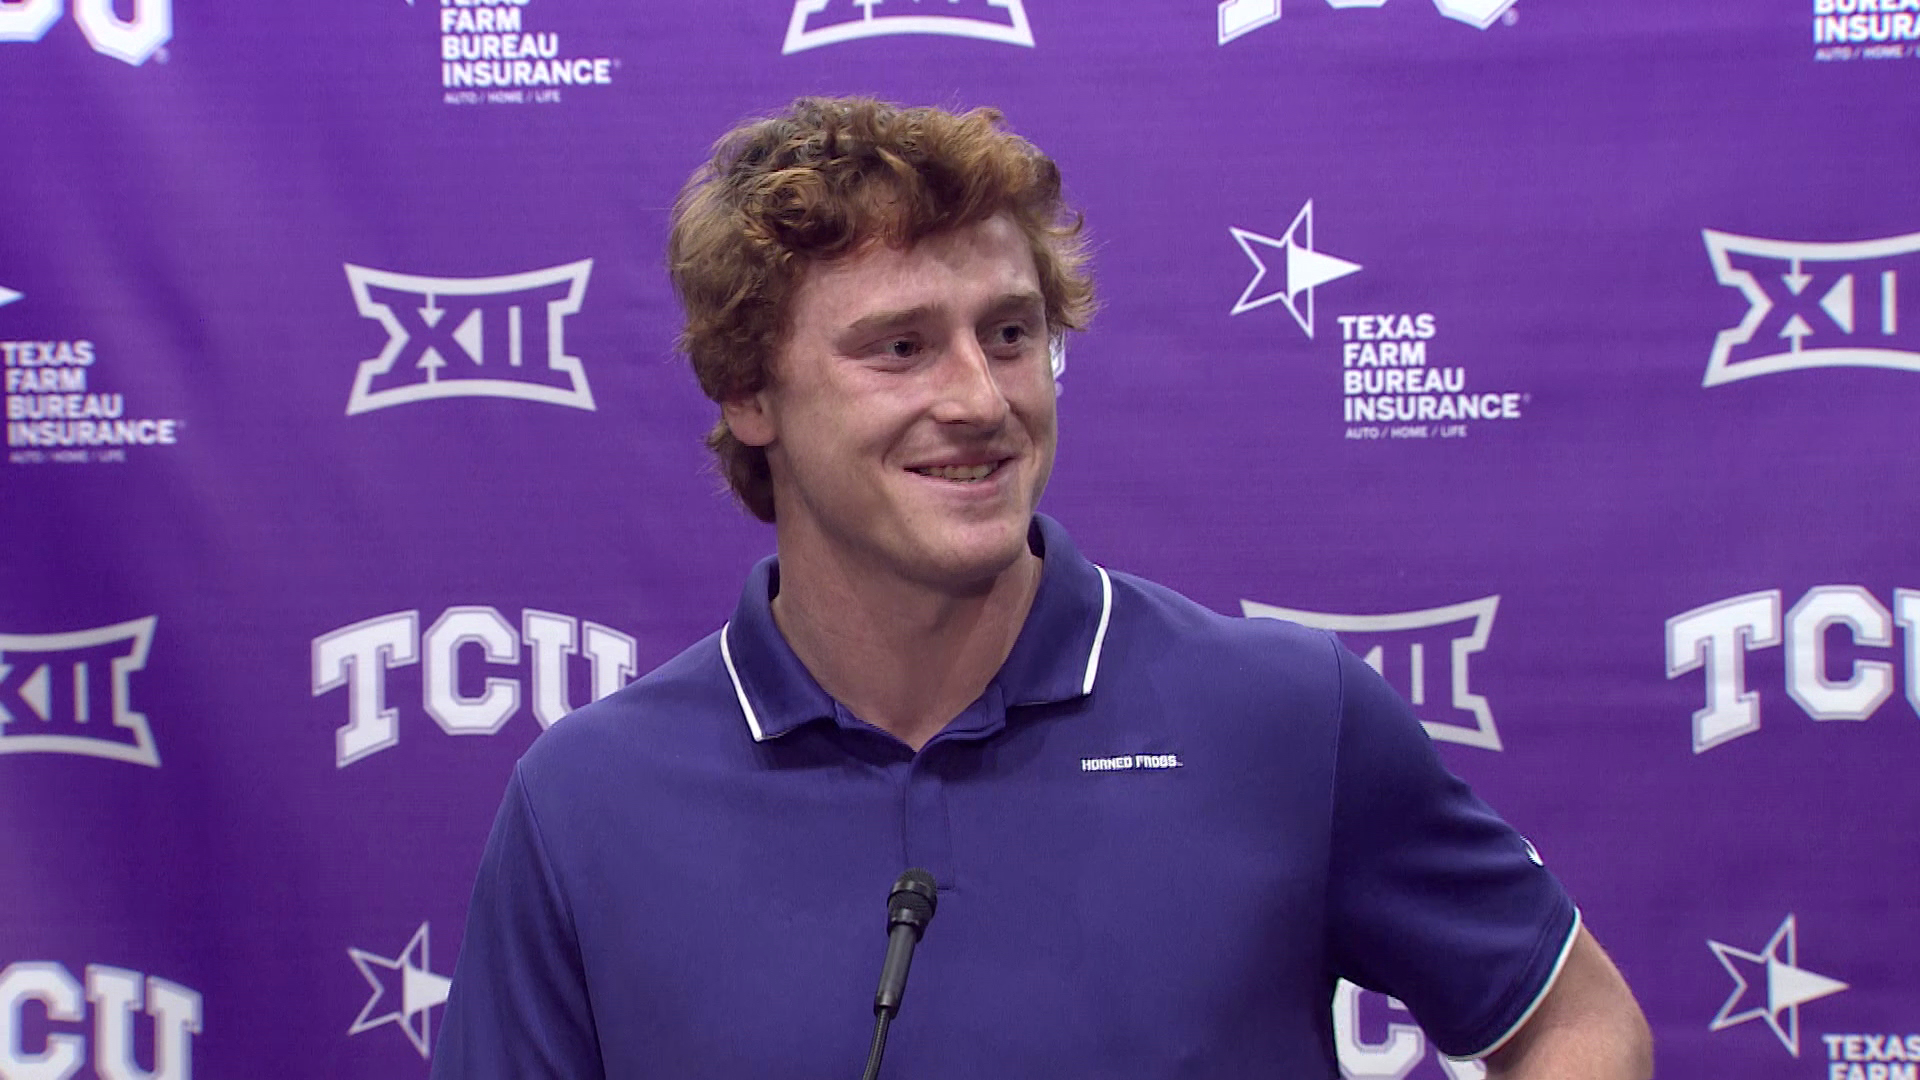 TCU QB and Iowa native Max Duggan led the Horned Frogs to a 12-1 record and a spot in the College Football Playoff.